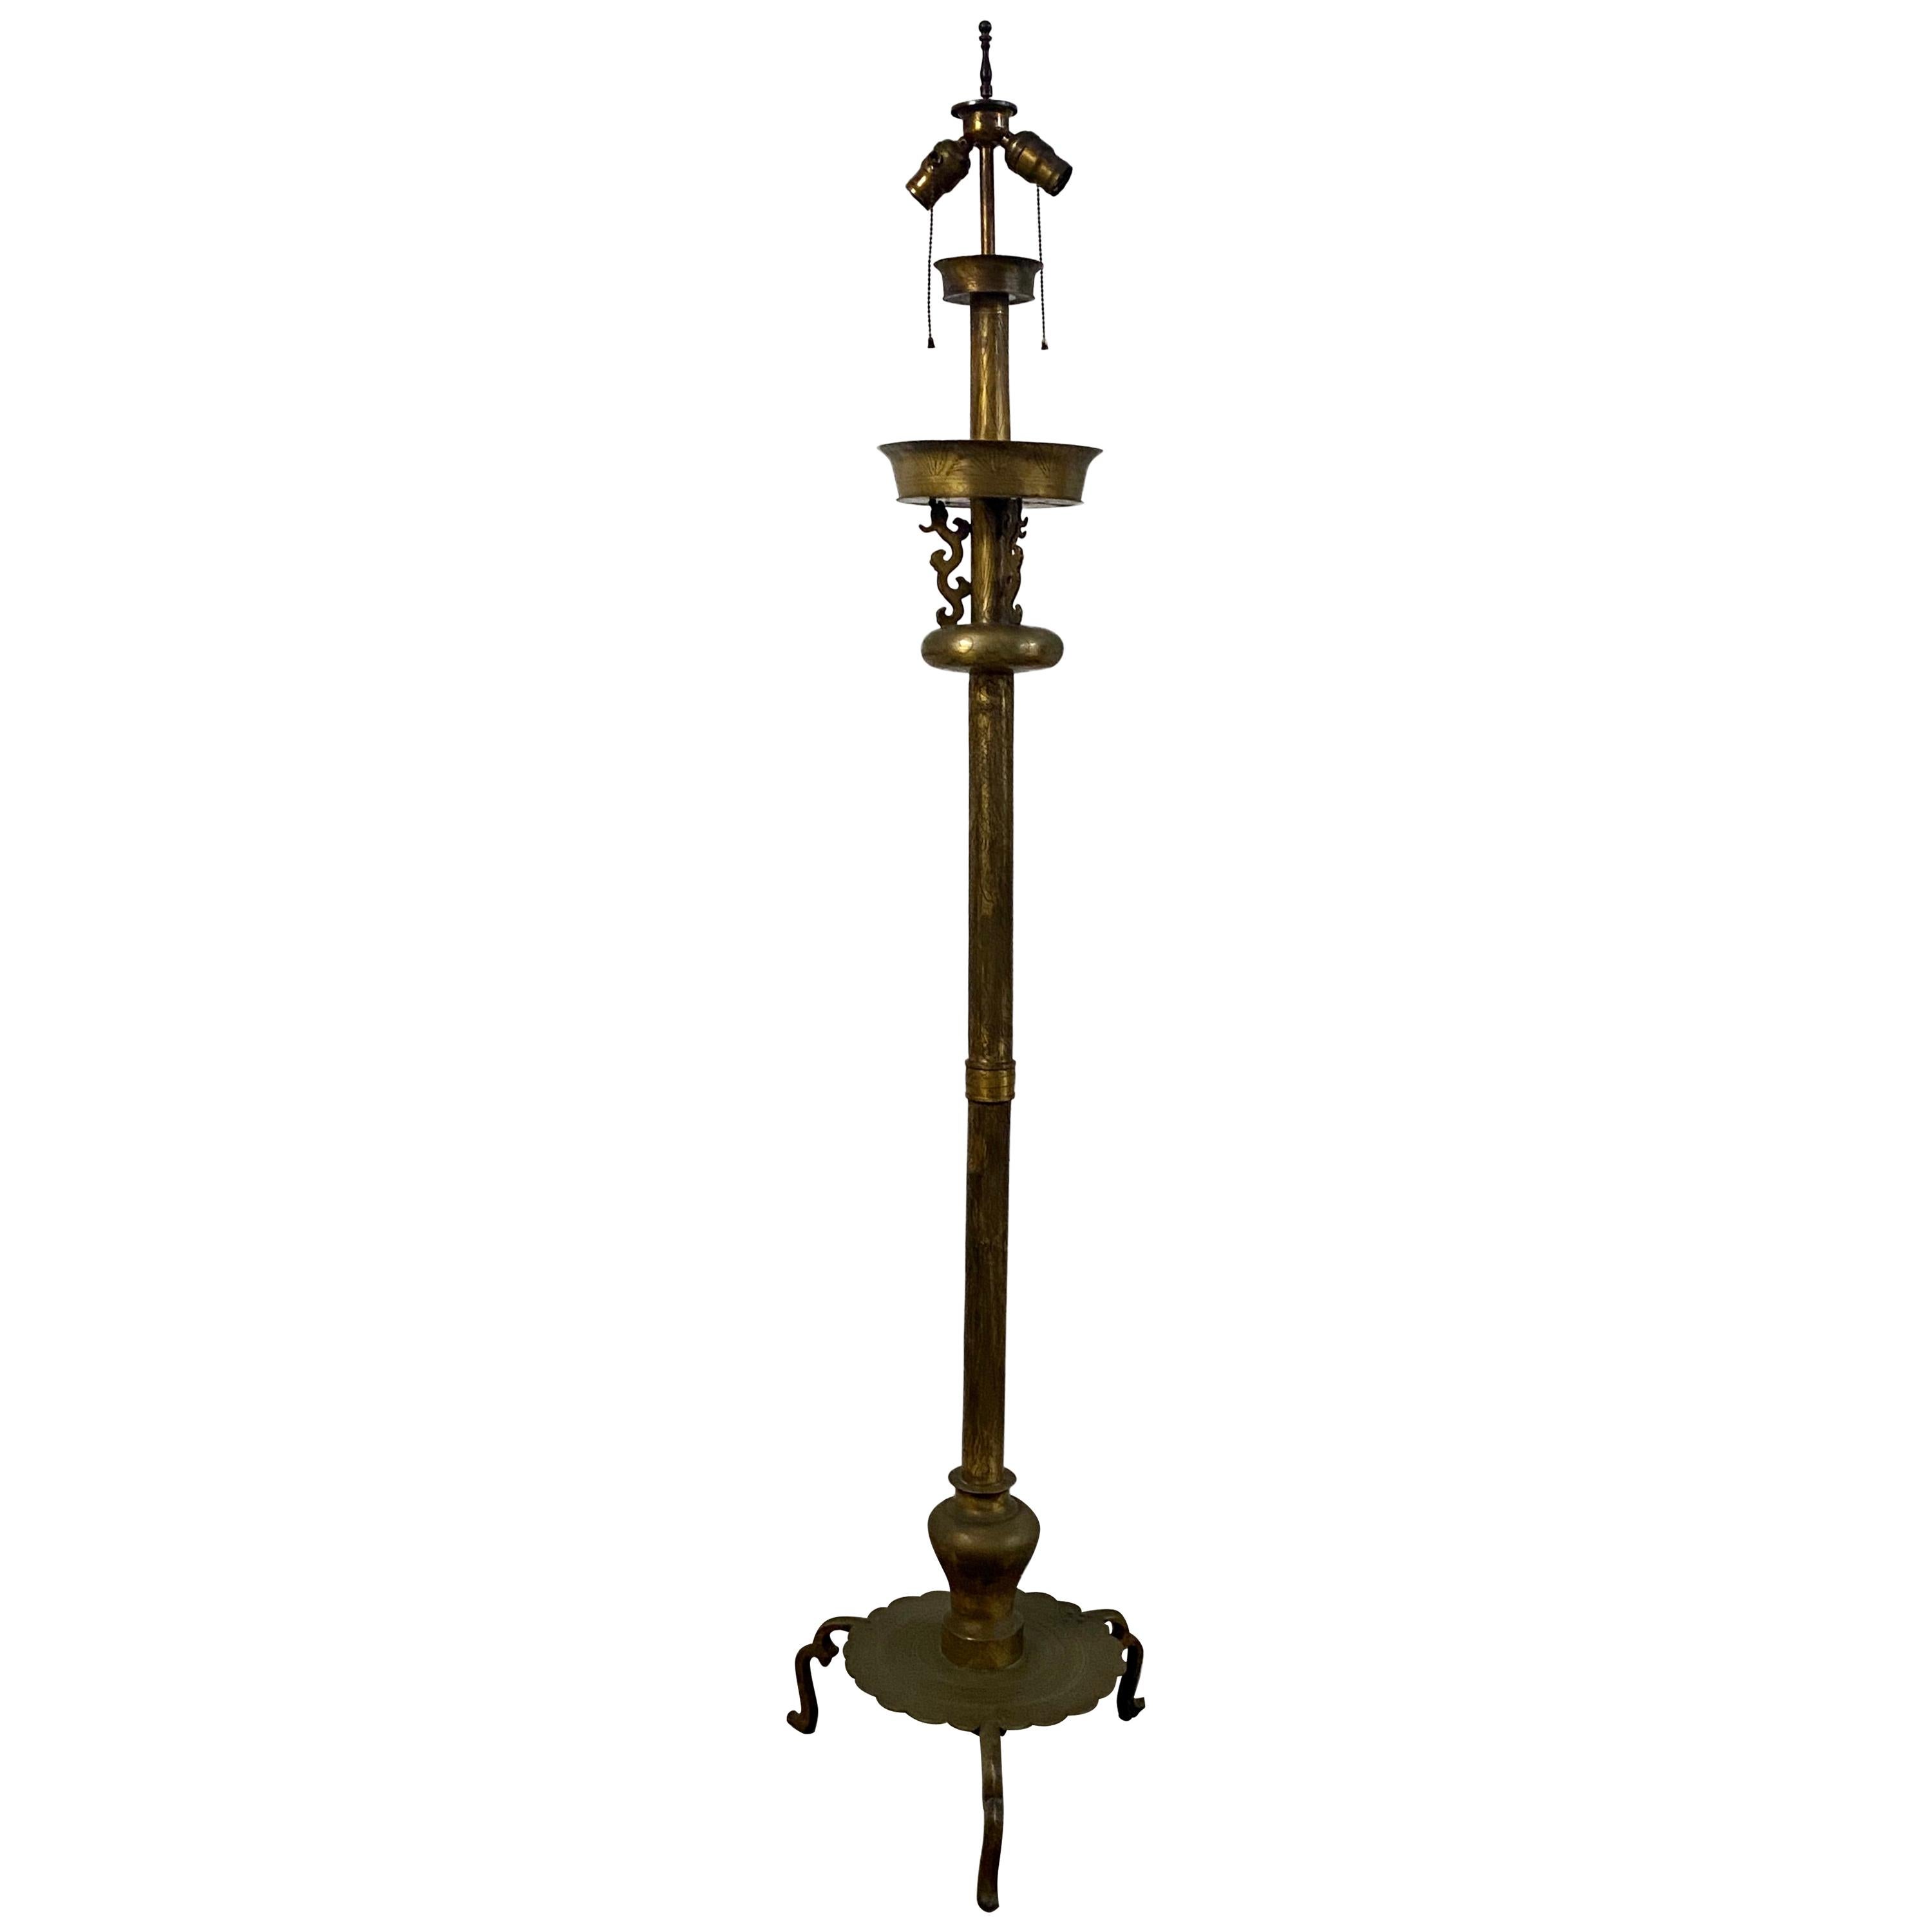 Asian Motif Etched Brass Free Standing Floor Lamp, circa 1920